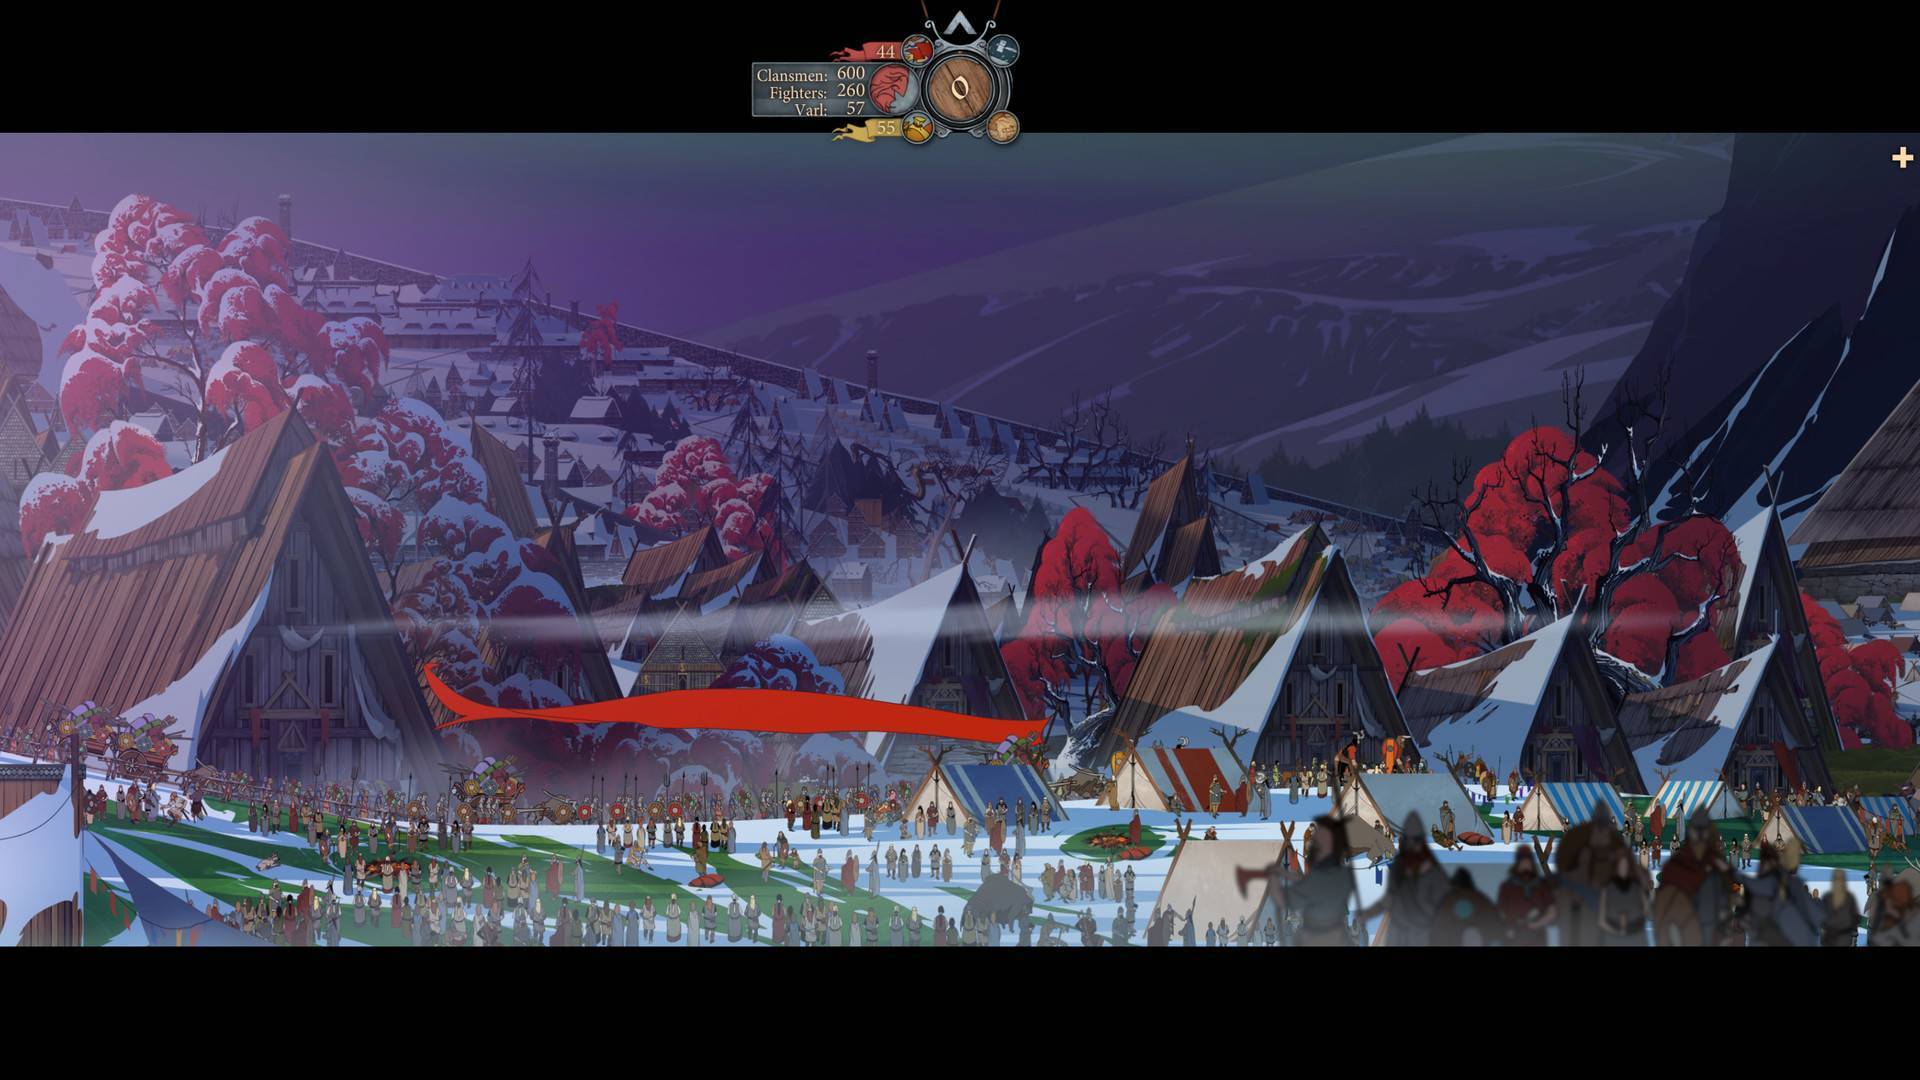 The Banner Saga 3 (PC) Key cheap - Price of $4.57 for Steam